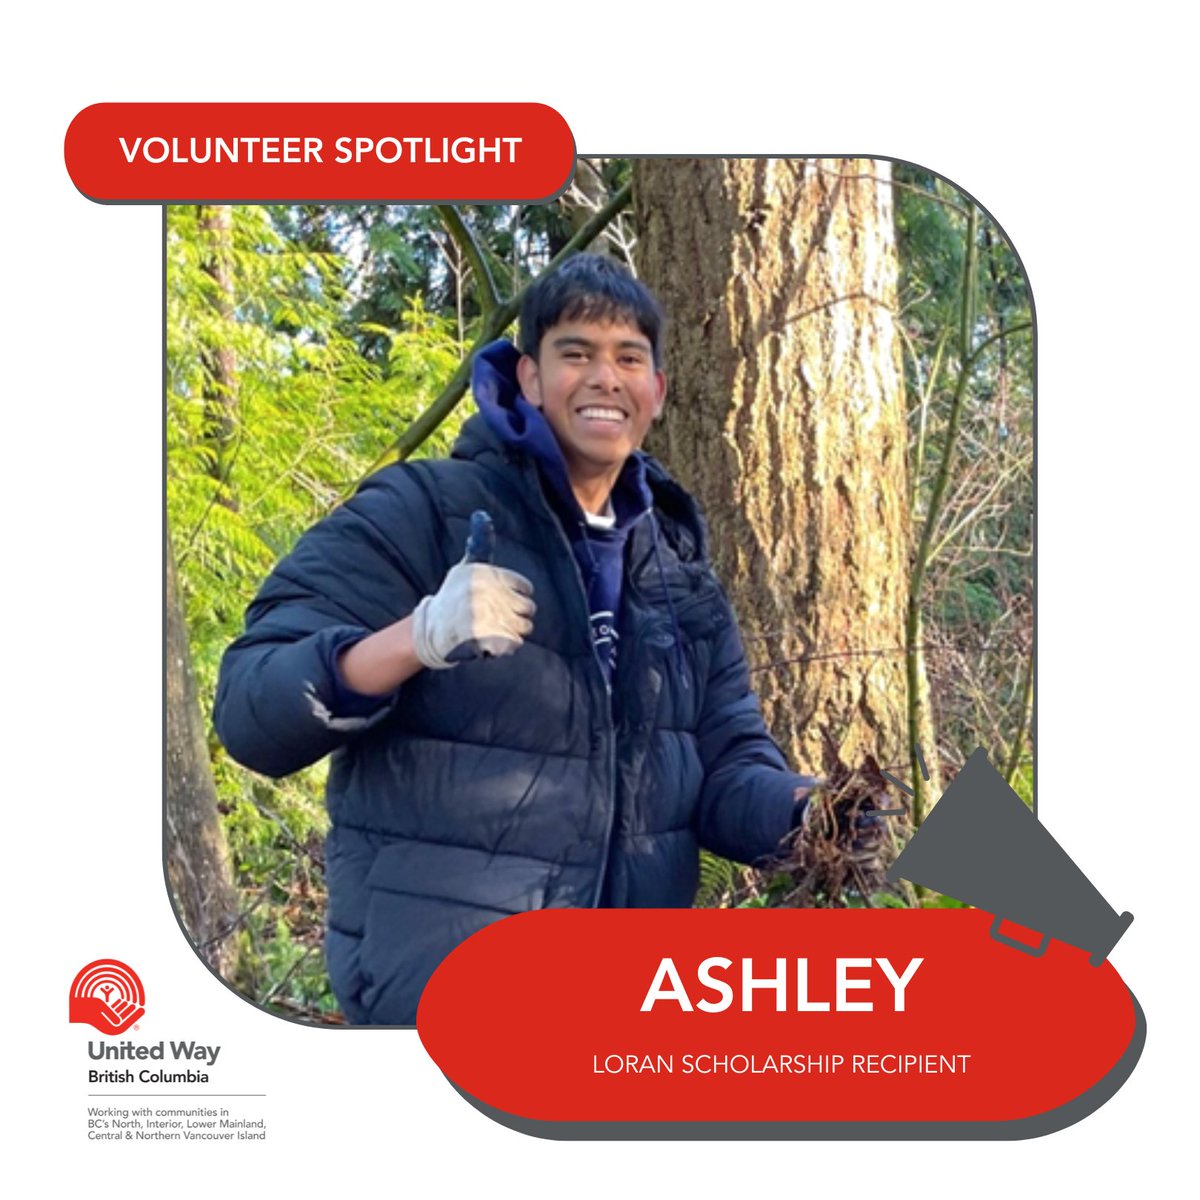 'I felt pretty lost for a bit and volunteering with seniors was a lot more fulfilling than math or tutoring. I felt I was actually making a difference in the world and that little bit of fulfillment kept me going for the year.'
Learn more: bit.ly/3HC4dW9
#NVW2024